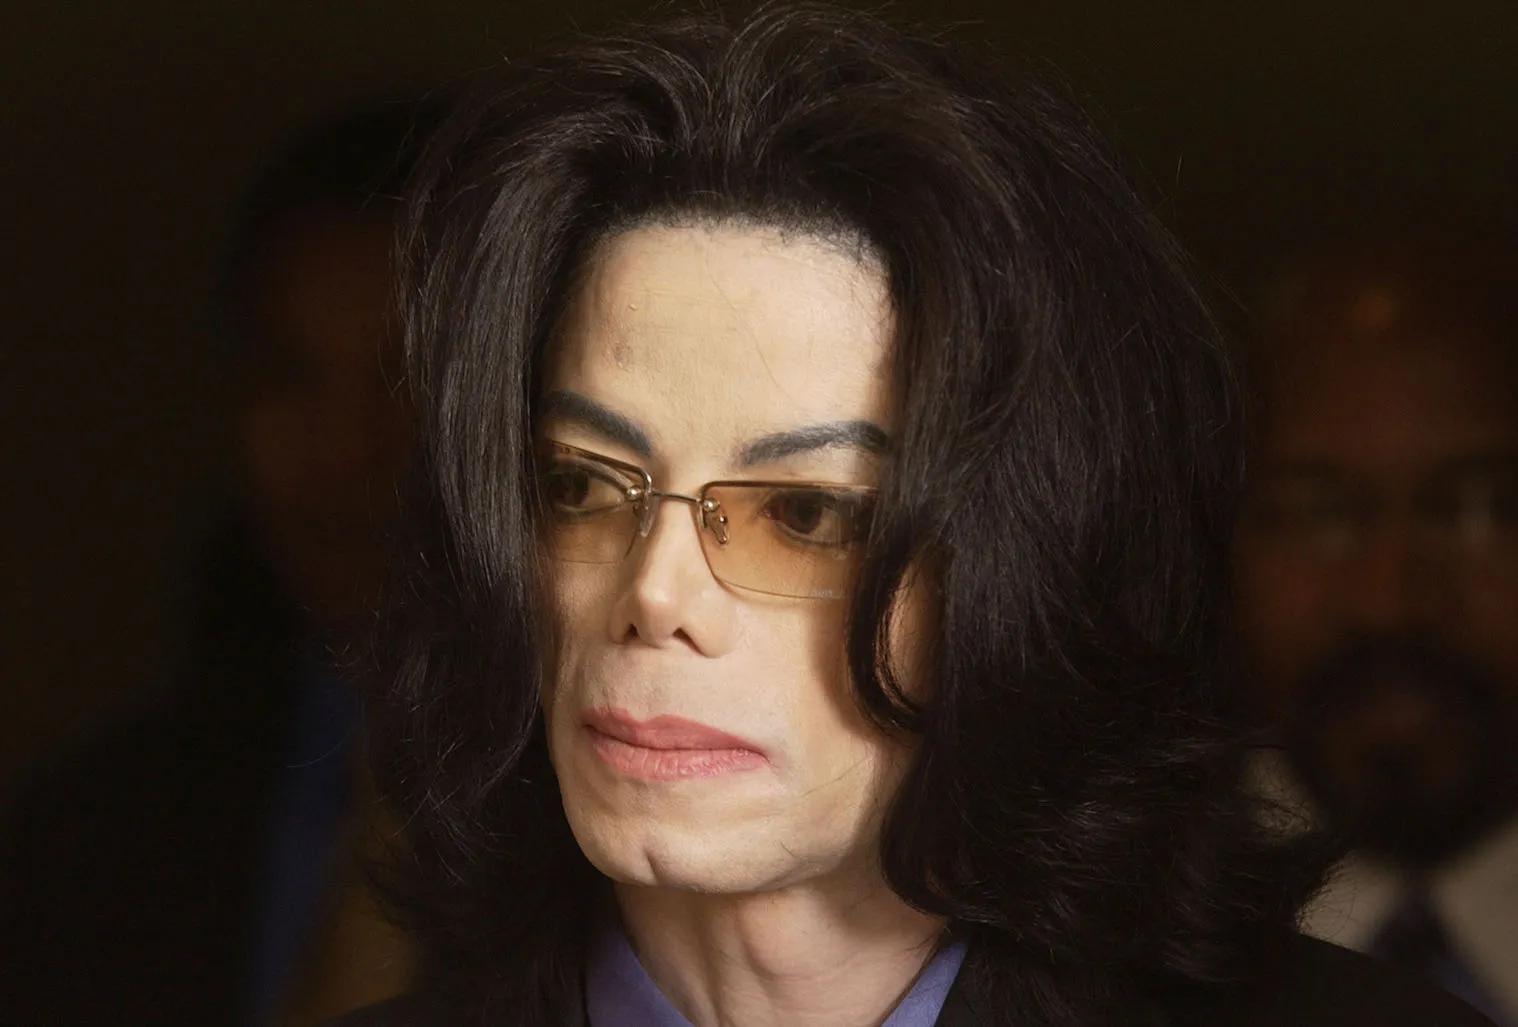 Late King of Pop Michael Jackson’s Camp Slams Accuser Wade Robson & James Safechuck’s Lawyer For Comparing Him to Catholic Church: ‘Incendiary Claims’